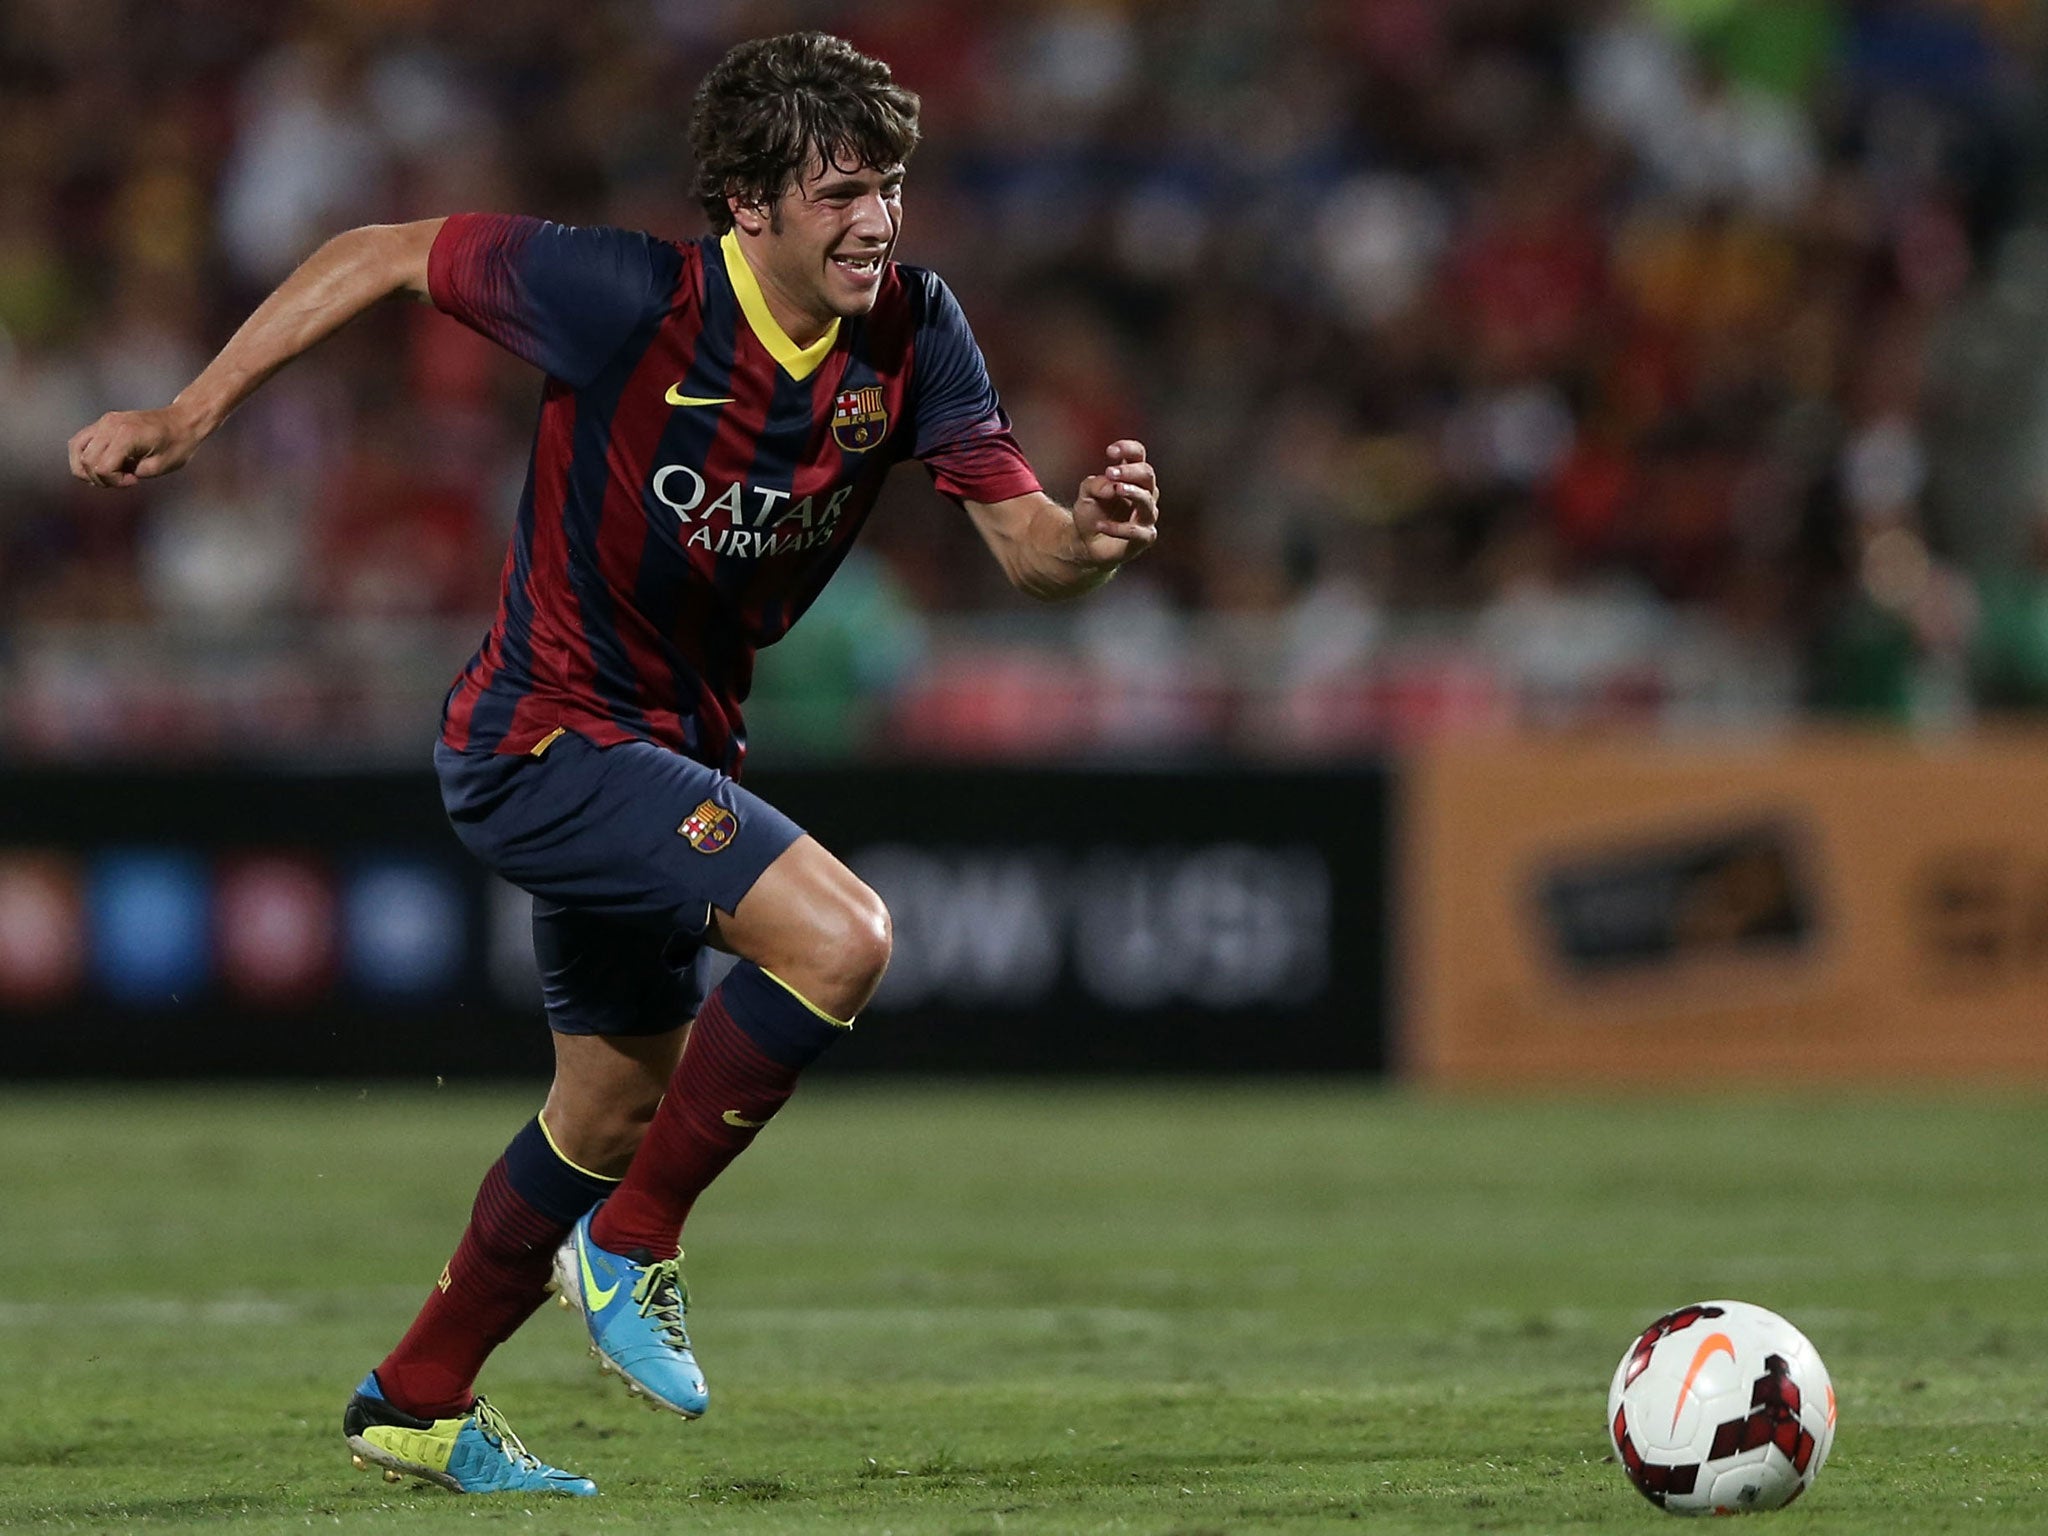 Barcelona midfielder Sergi Roberto is a reported target for both Tottenham and Liverpool